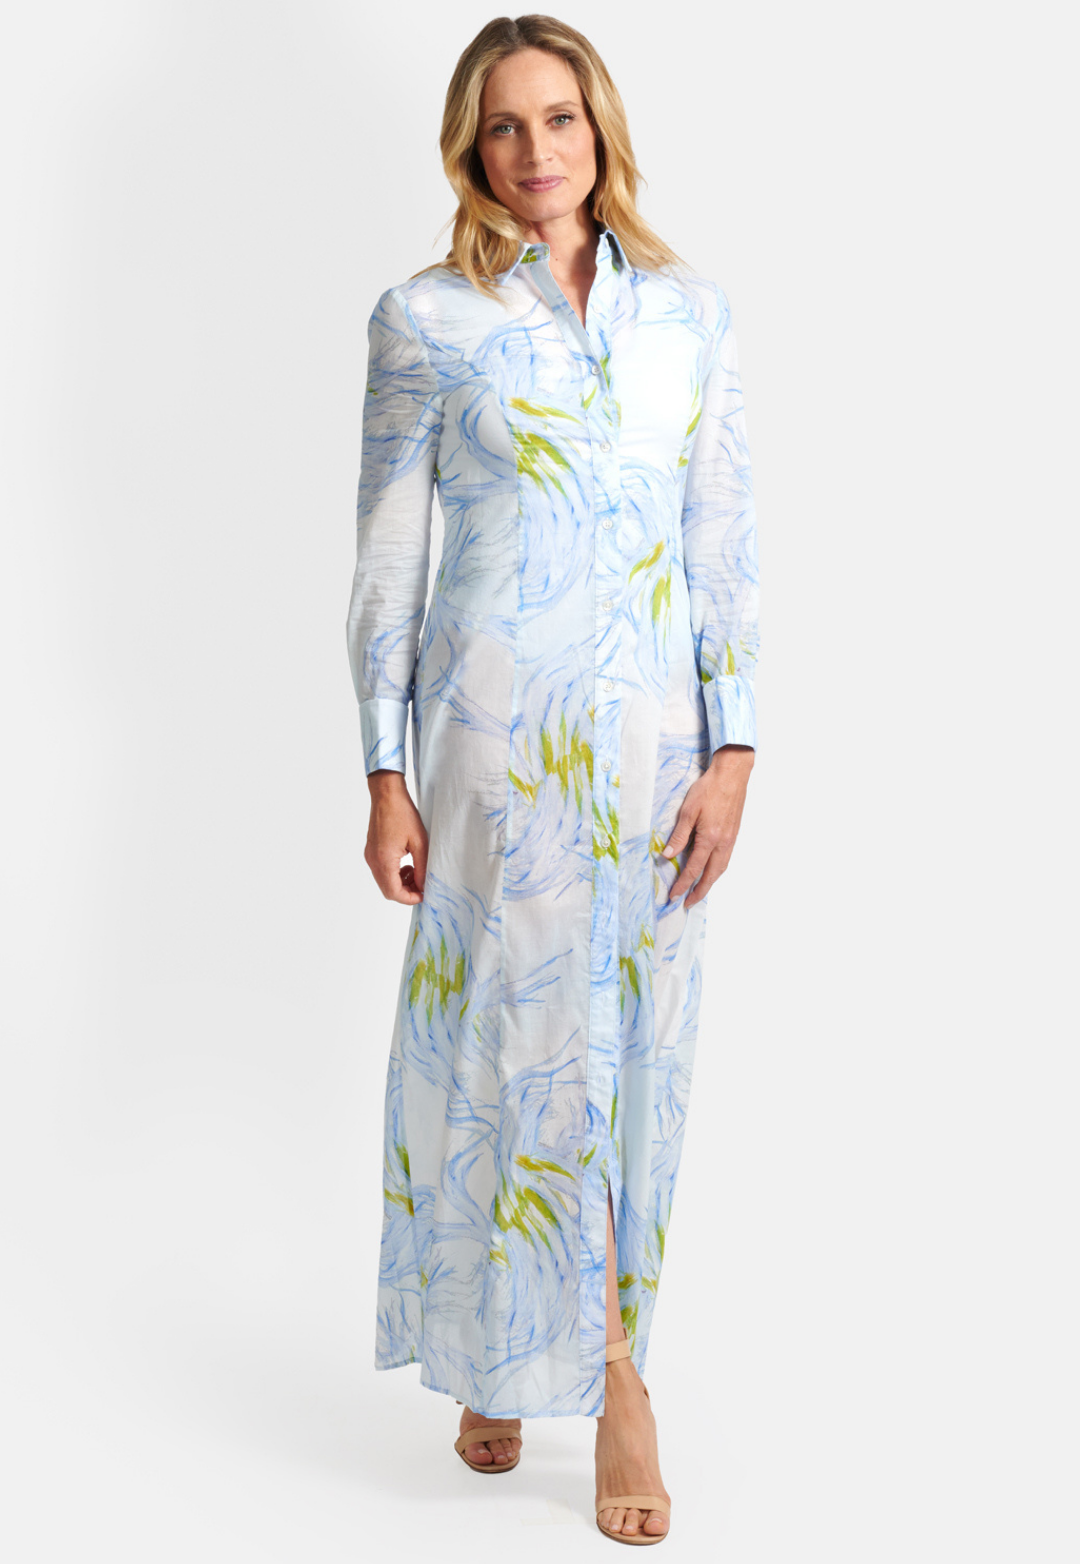 Woman wearing yellow and blue feather printed cotton shirt dress by Ala von Auersperg 